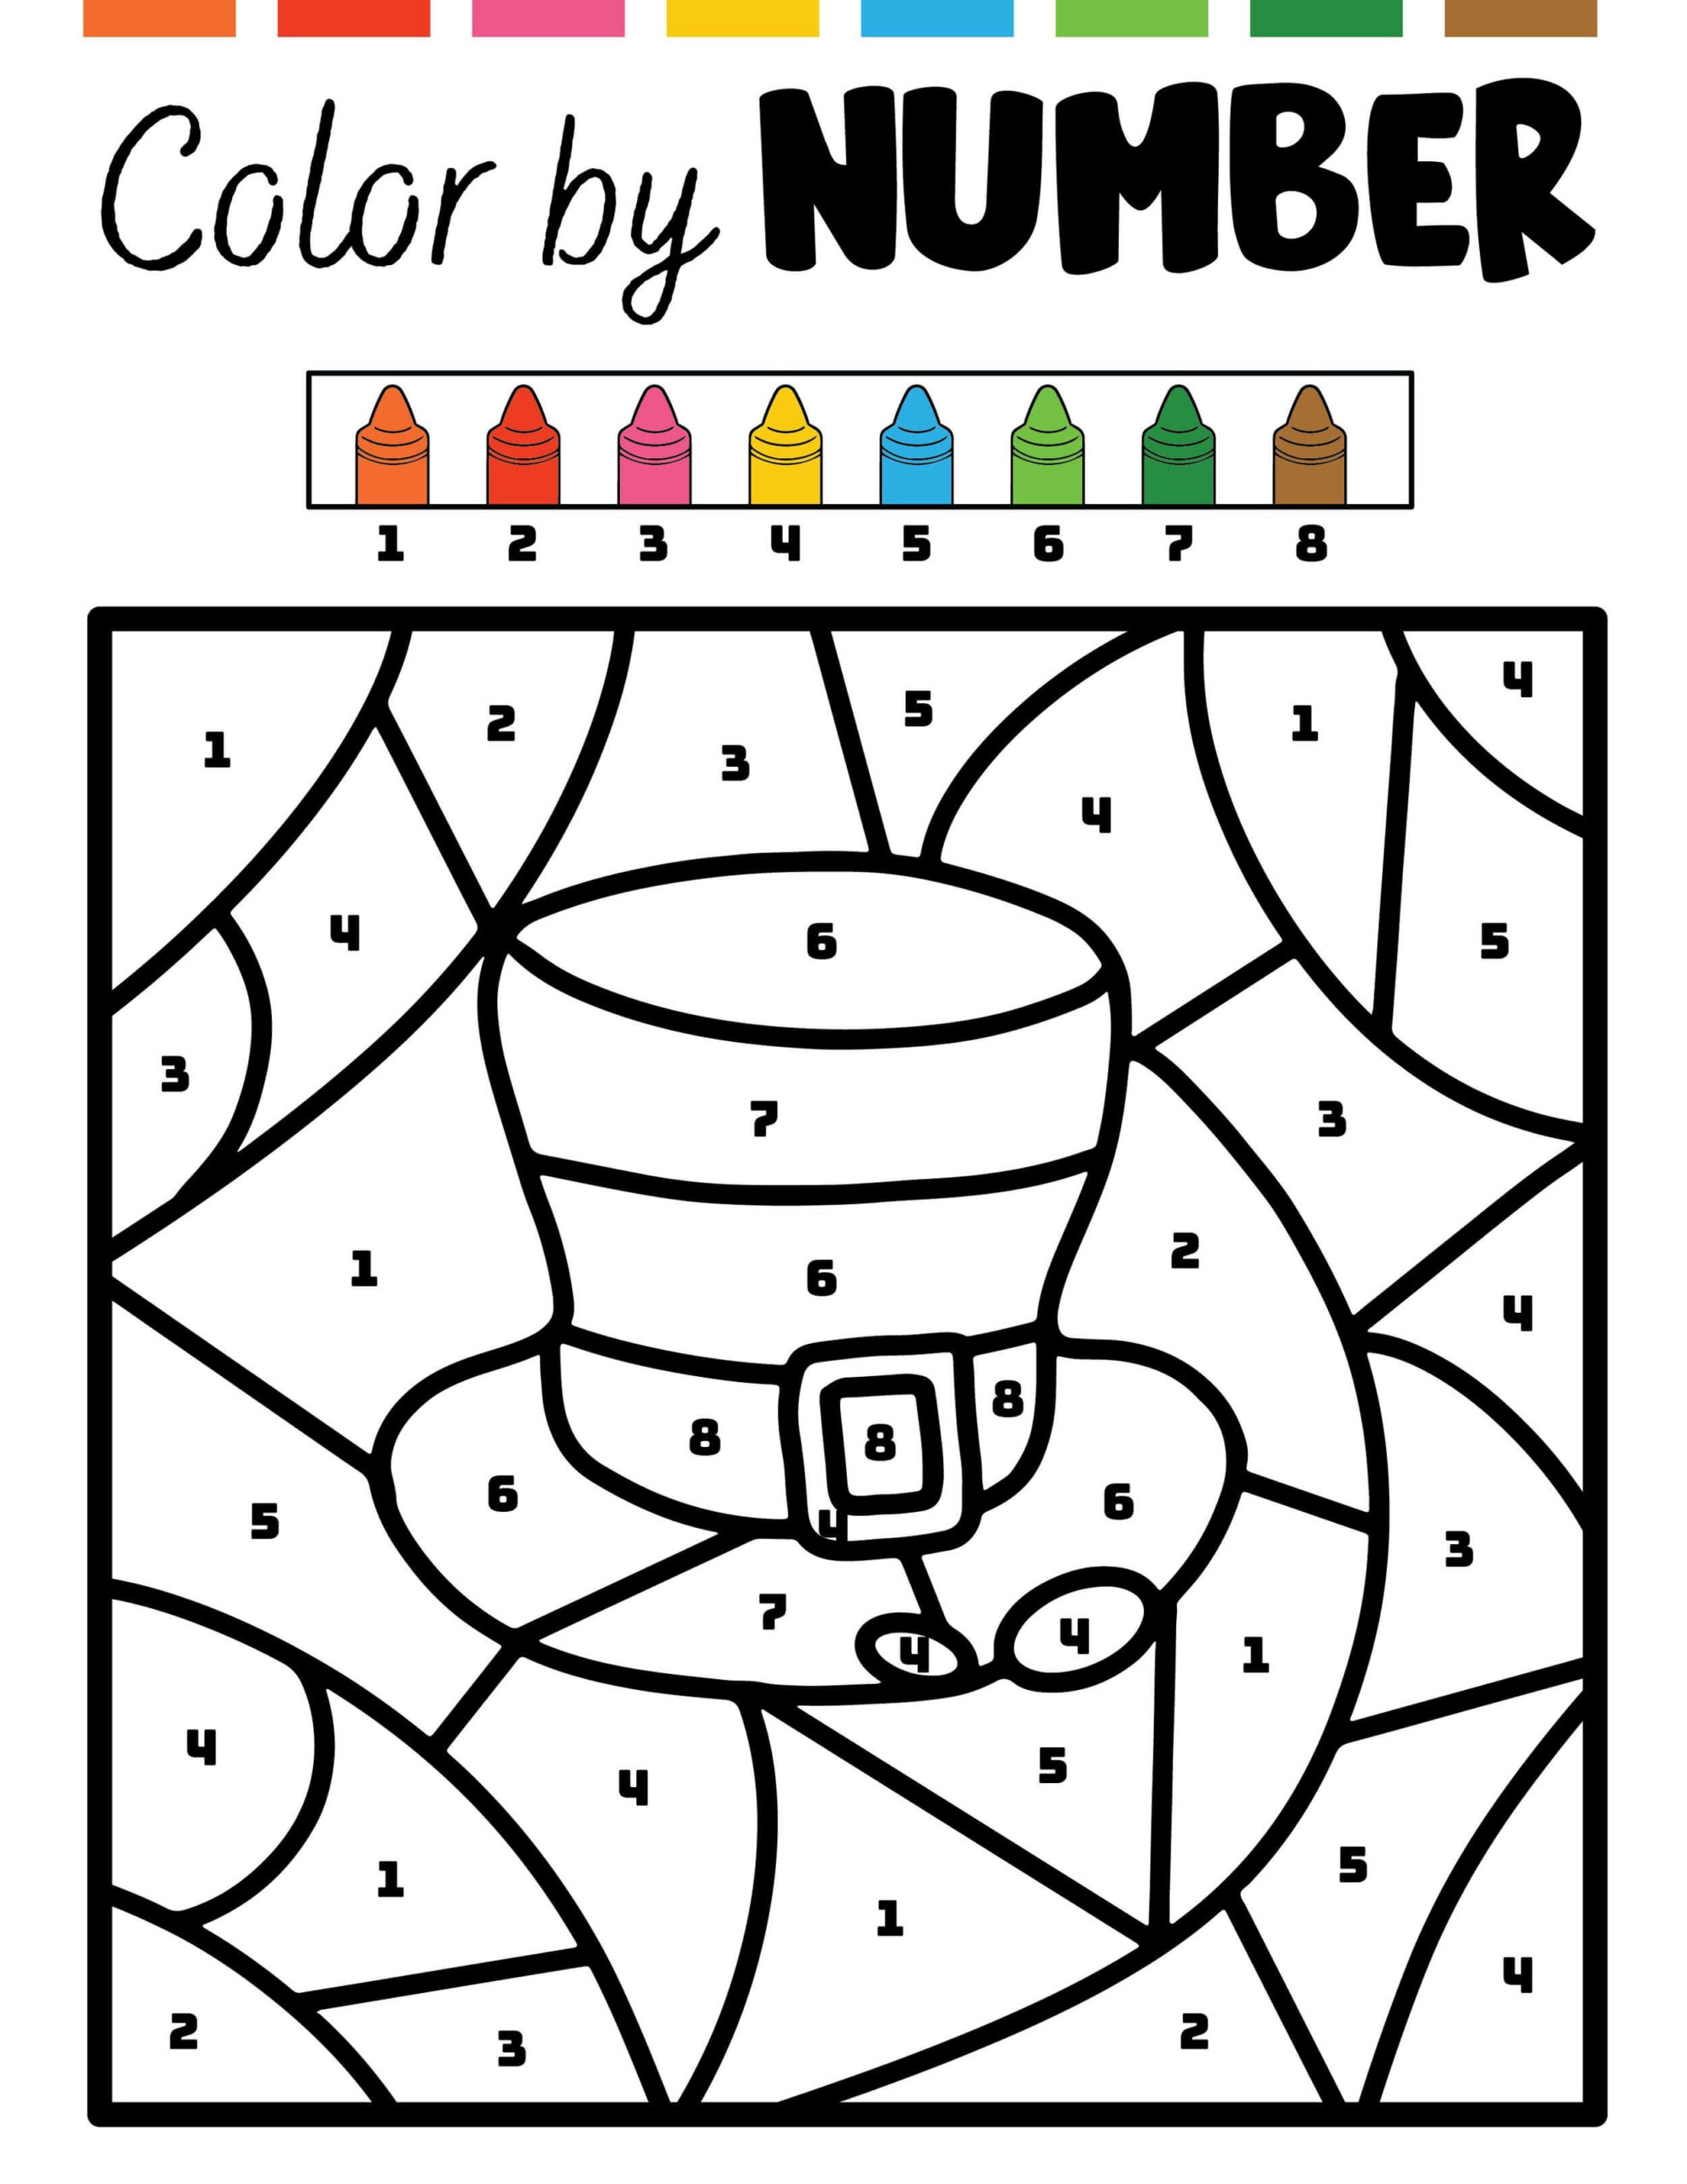 ideas-for-st-patrick-s-day-lol-coloring-pages